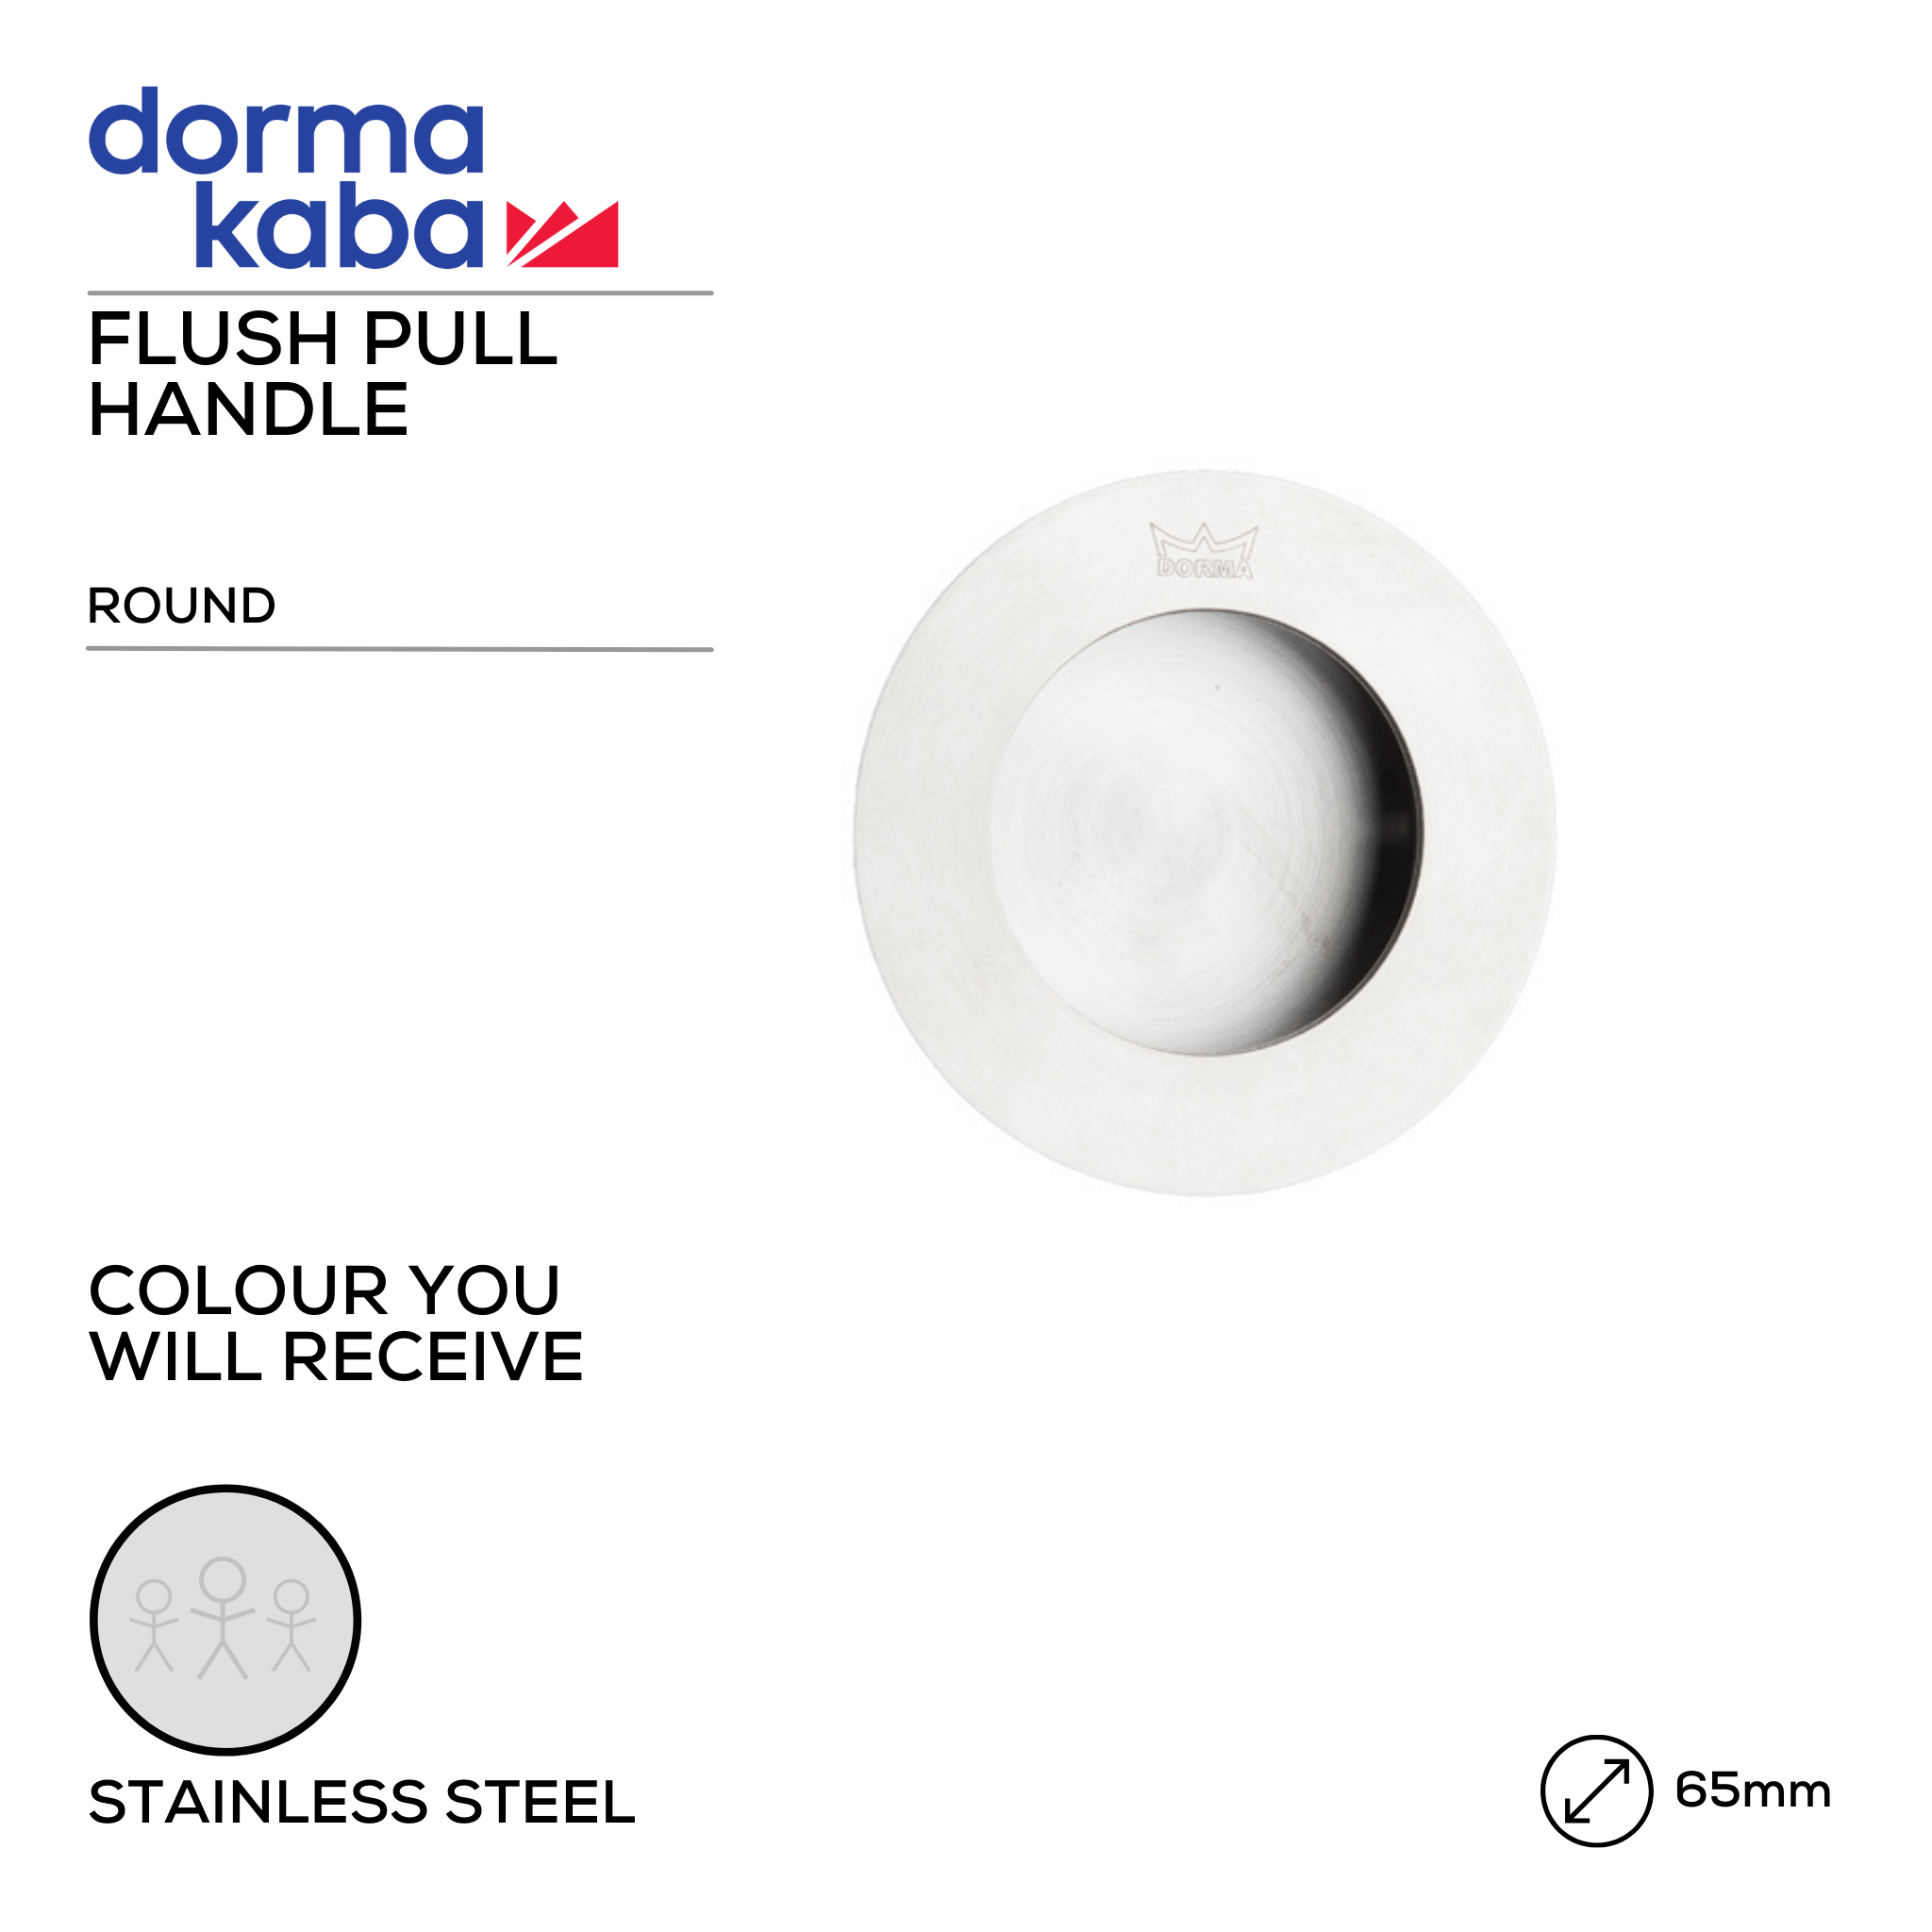 DFP-SS-027, Pull Handle, Recessed, Flush, Round, 65mm (l), Stainless Steel, DORMAKABA